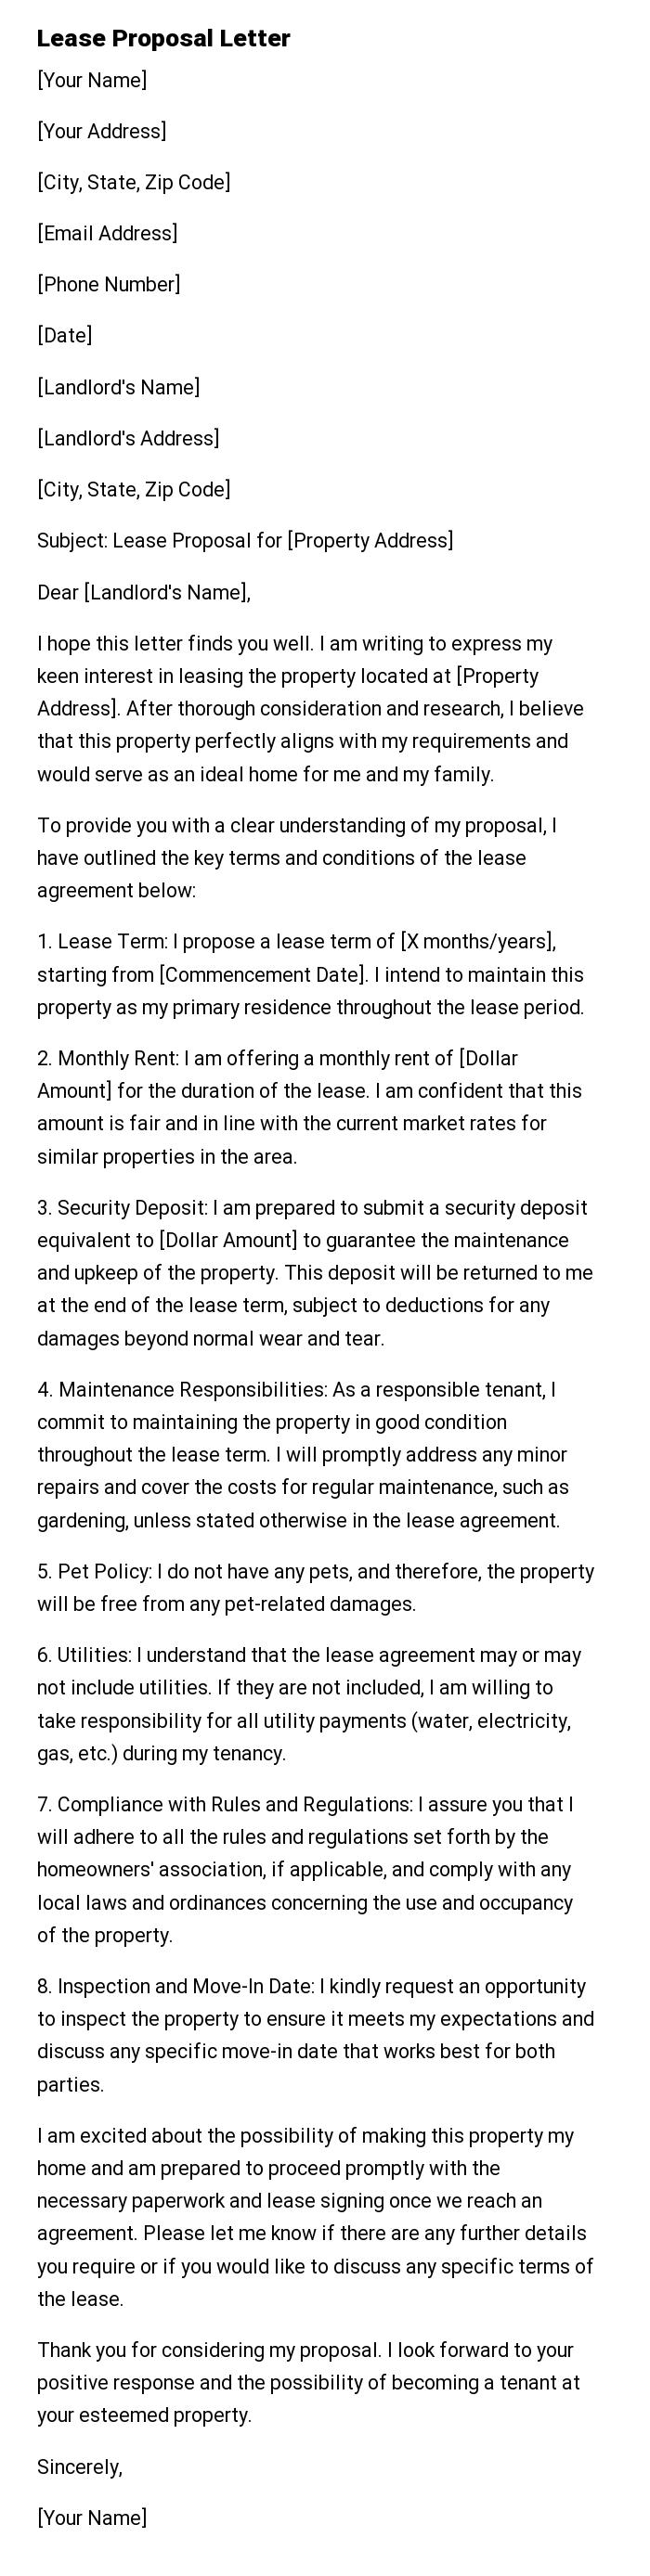 Lease Proposal Letter